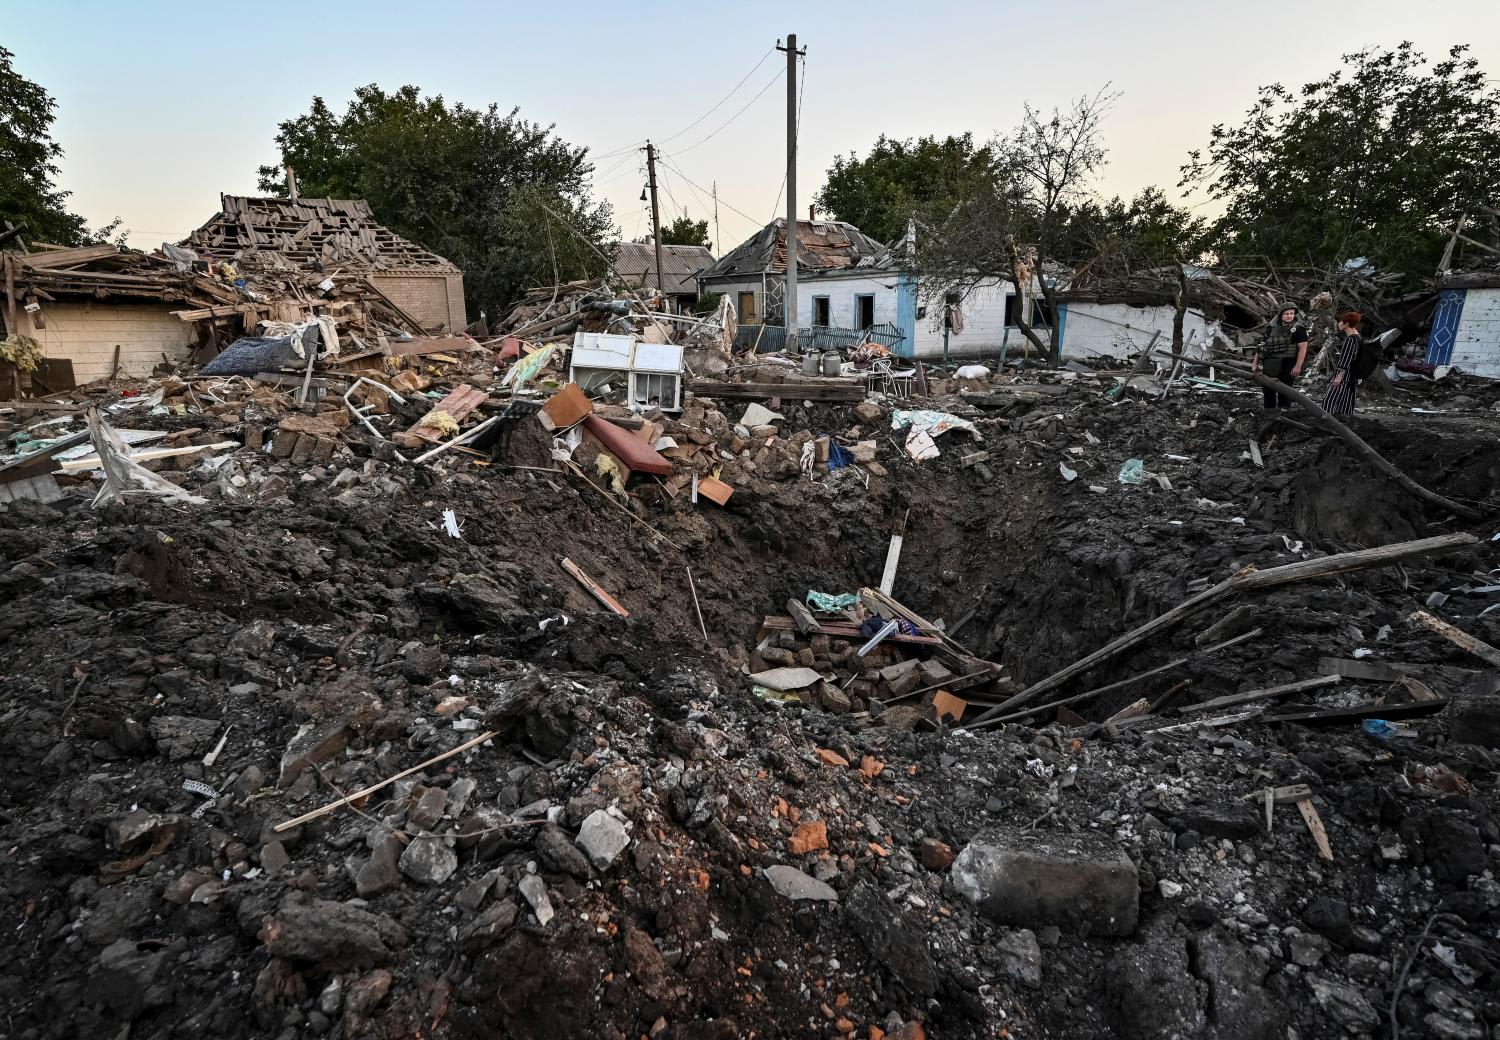 People stand next to a residential house destroyed by a Russian military strike, as Russia's attack on Ukraine continues, in Chaplyne, Dnipropetrovsk region, Ukraine Aug 24, 2022.